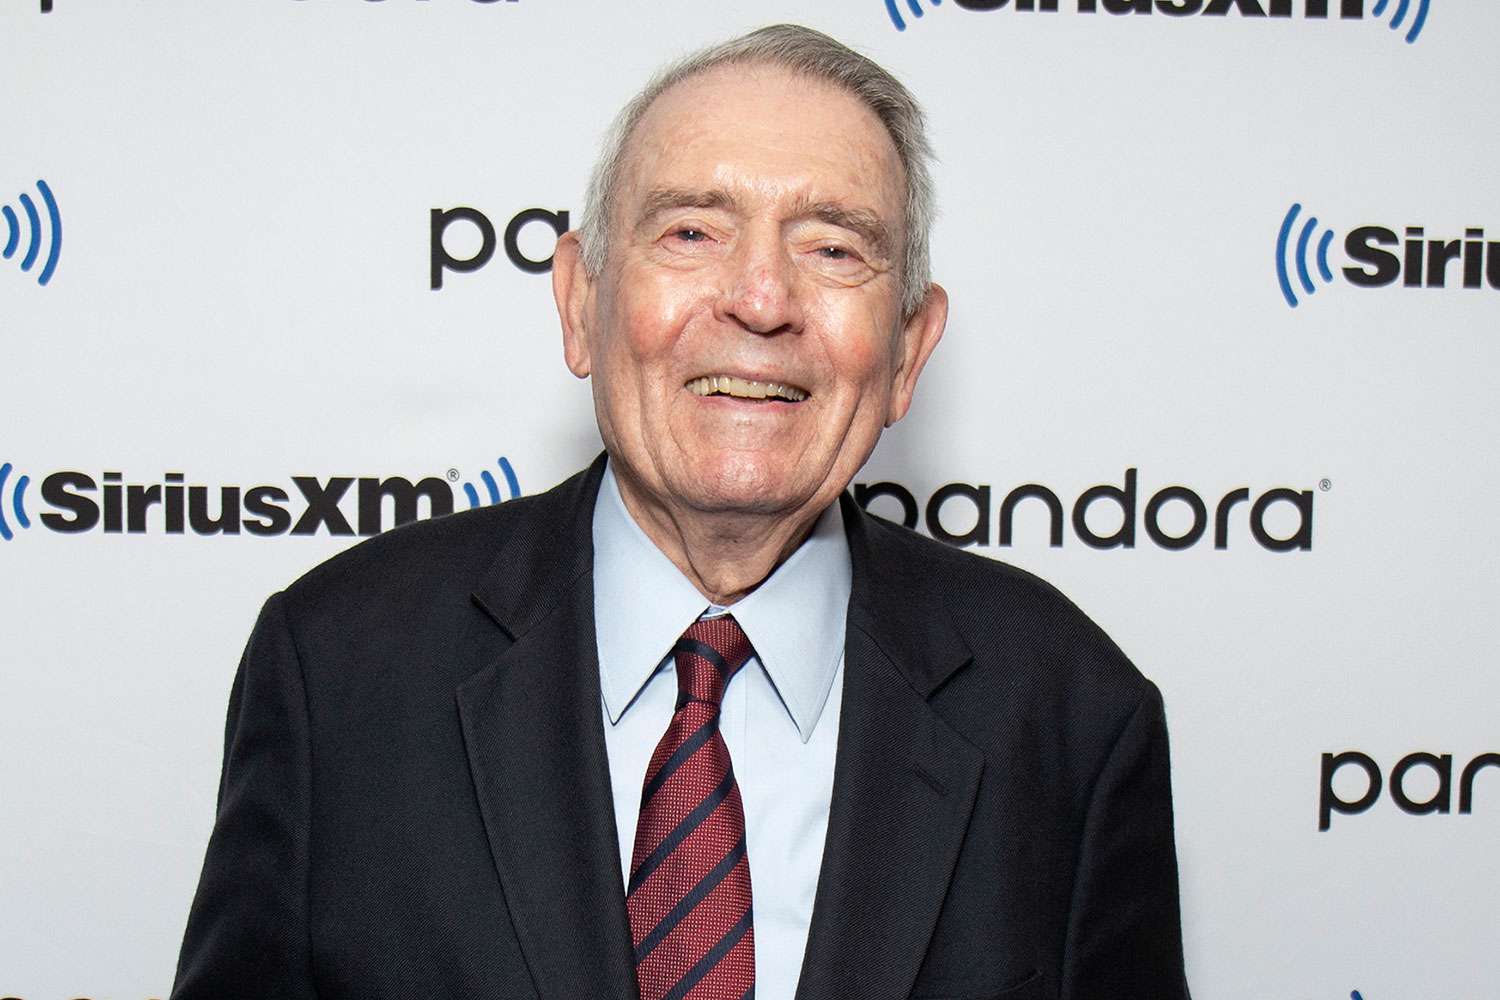 CBS News Welcomes Back Dan Rather: Special Feature on CBS Sunday Morning